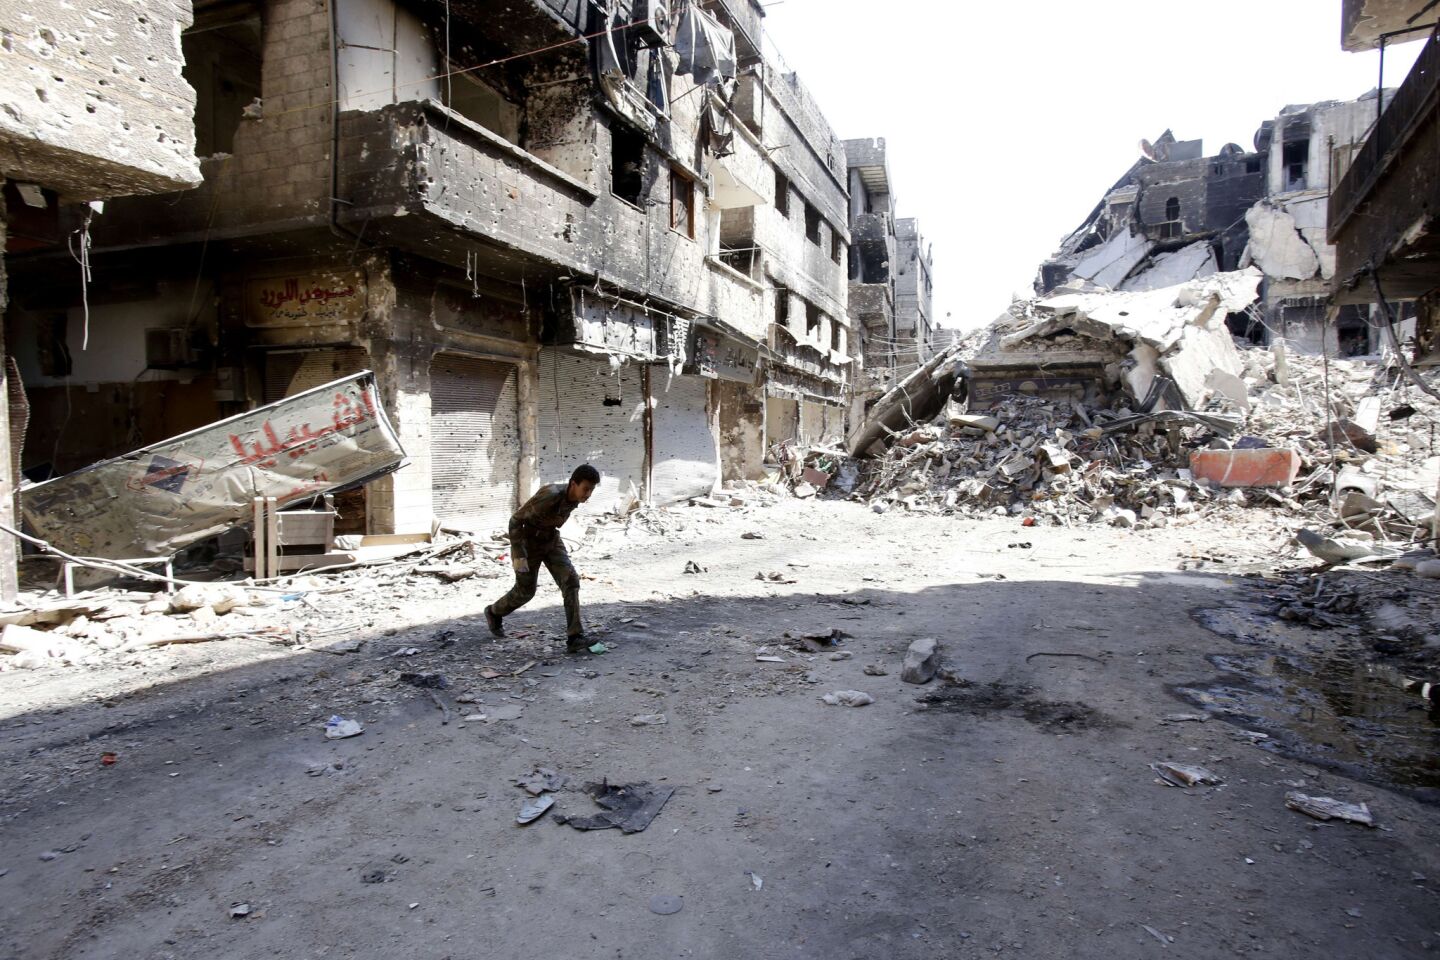 A fighter allied with Syrian President Bashar Assad runs across the street after fighting with rebels in the Yarmouk refugee camp in the capital, Damascus.